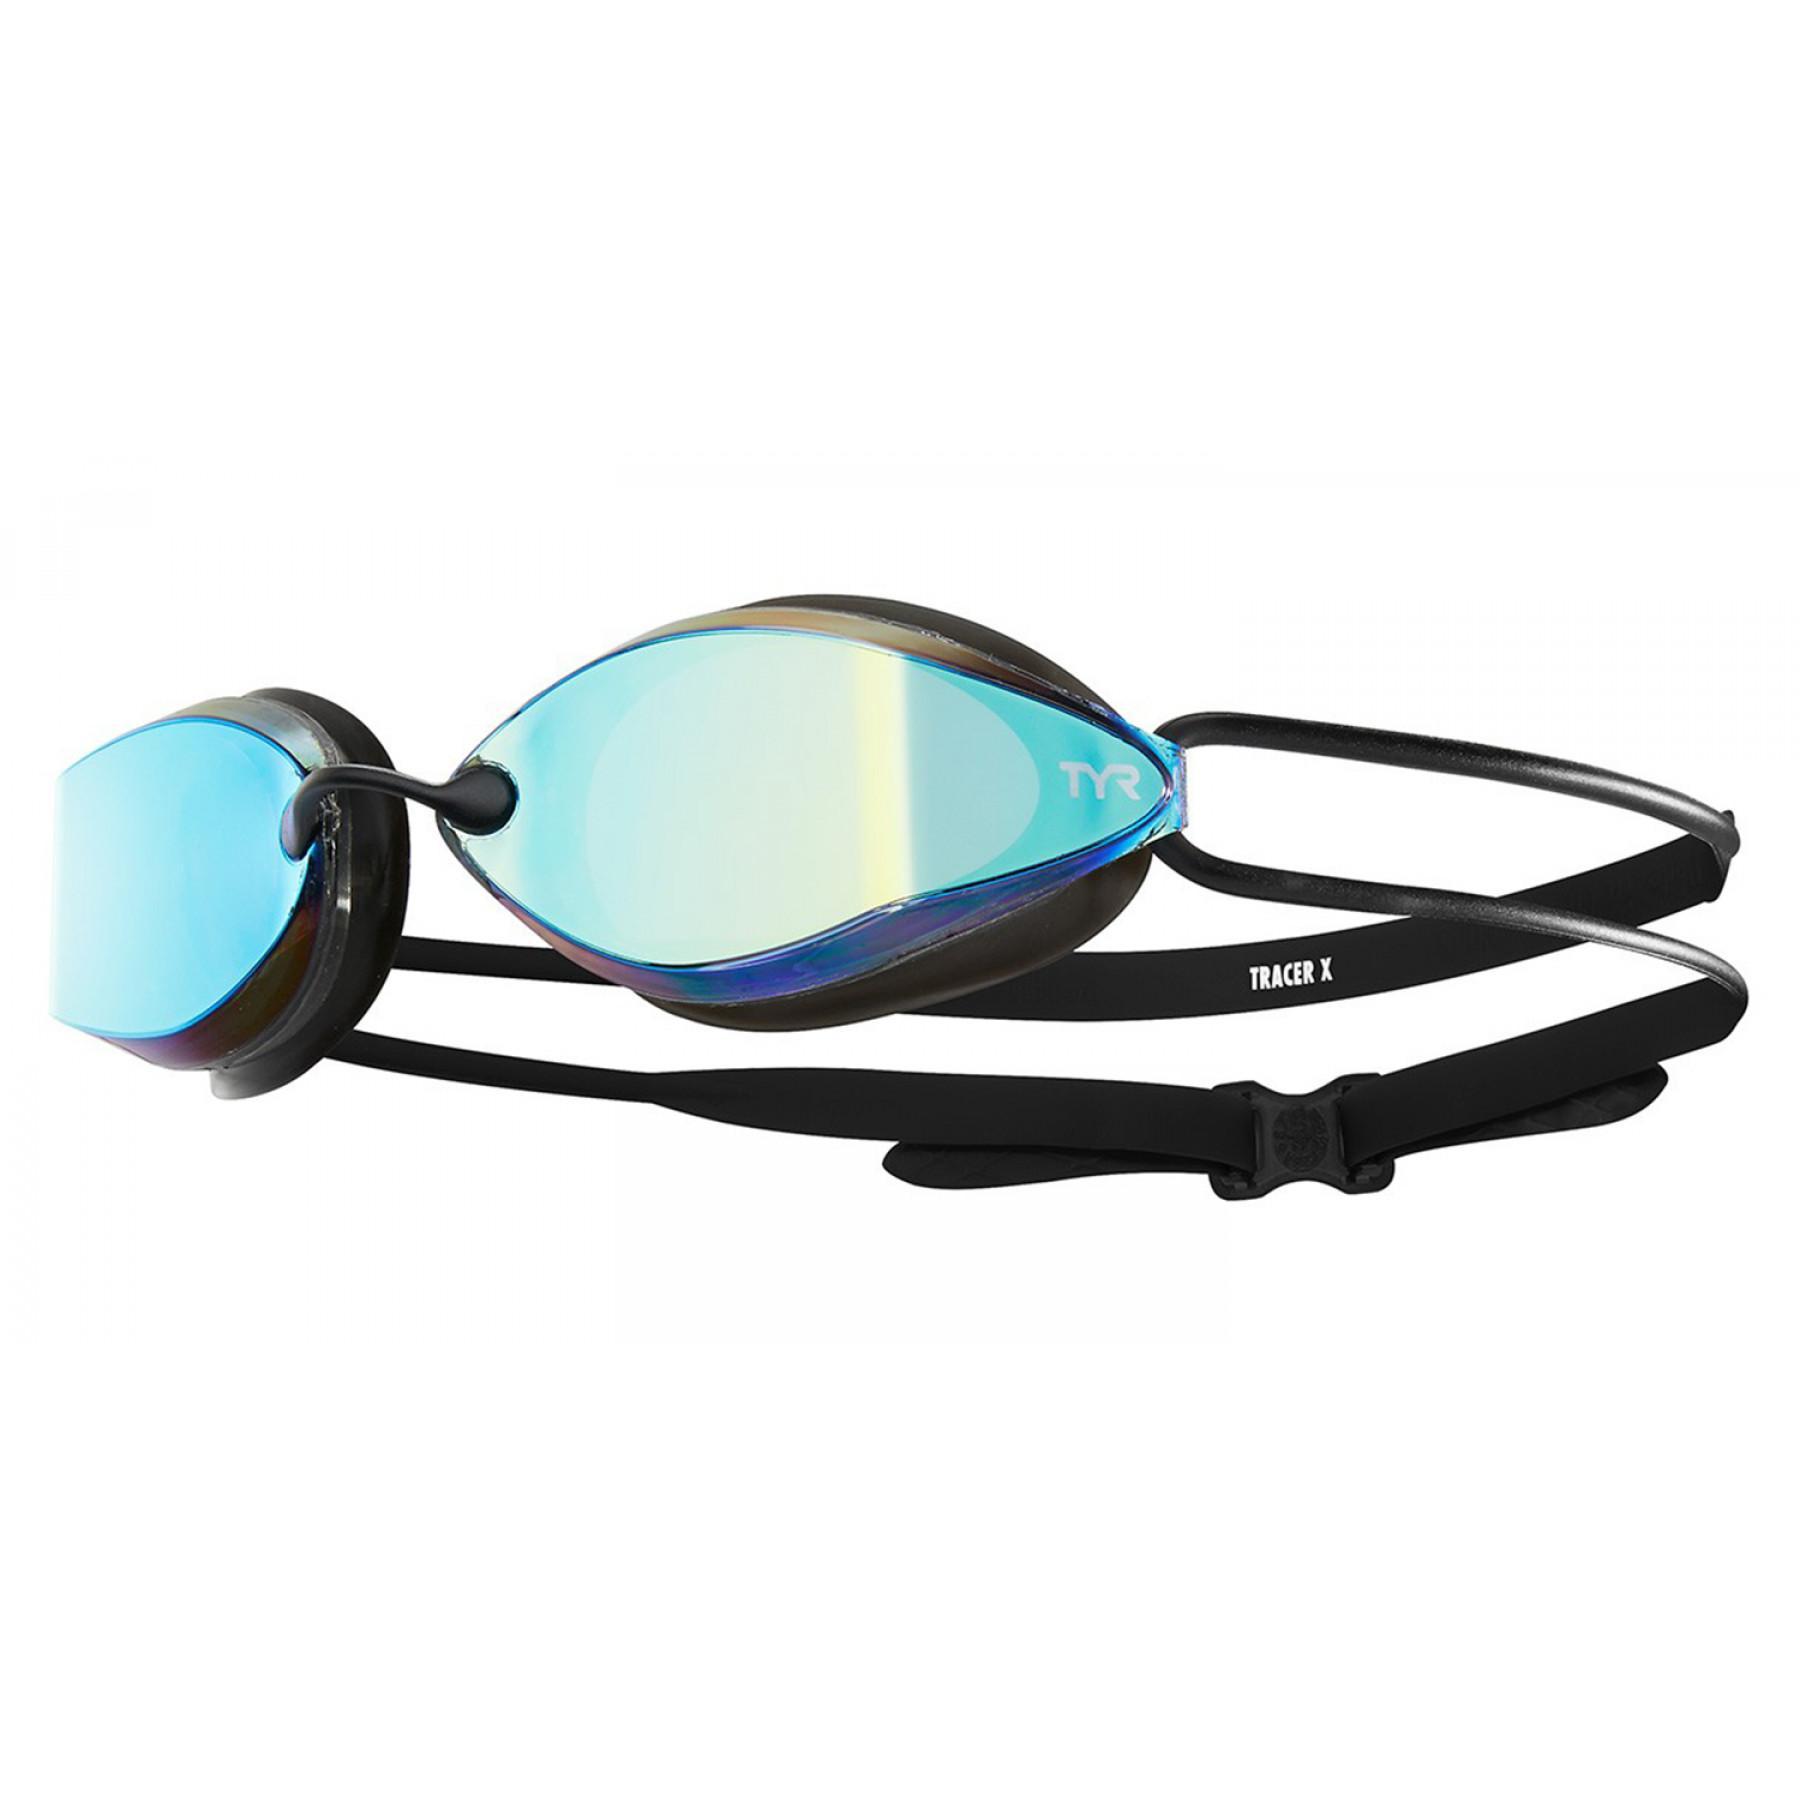 Schwimmbrille TYR Tracer X Racing Nano Miroir